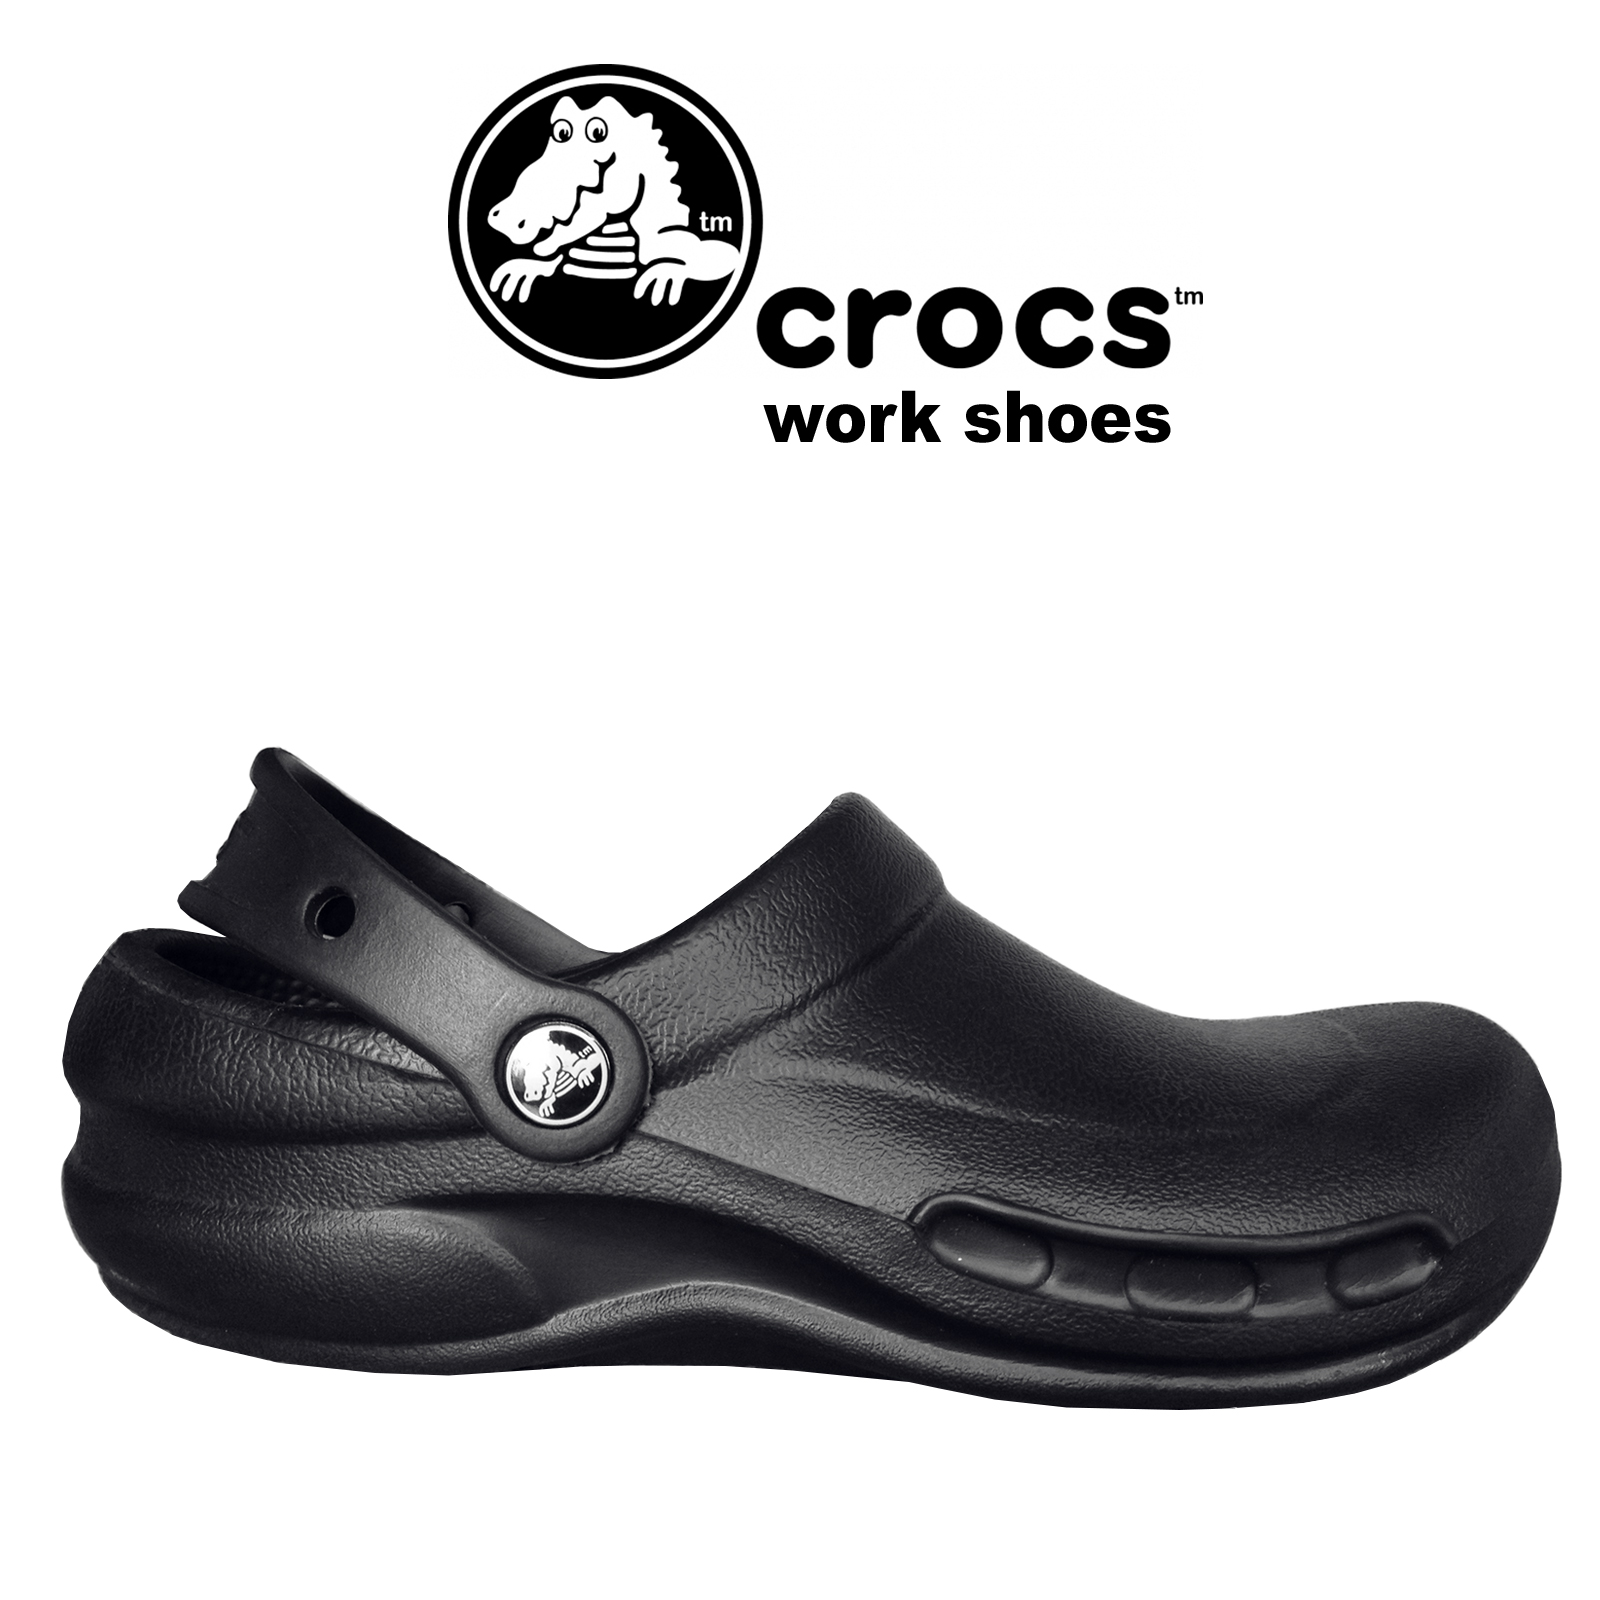 crocs shoes for work